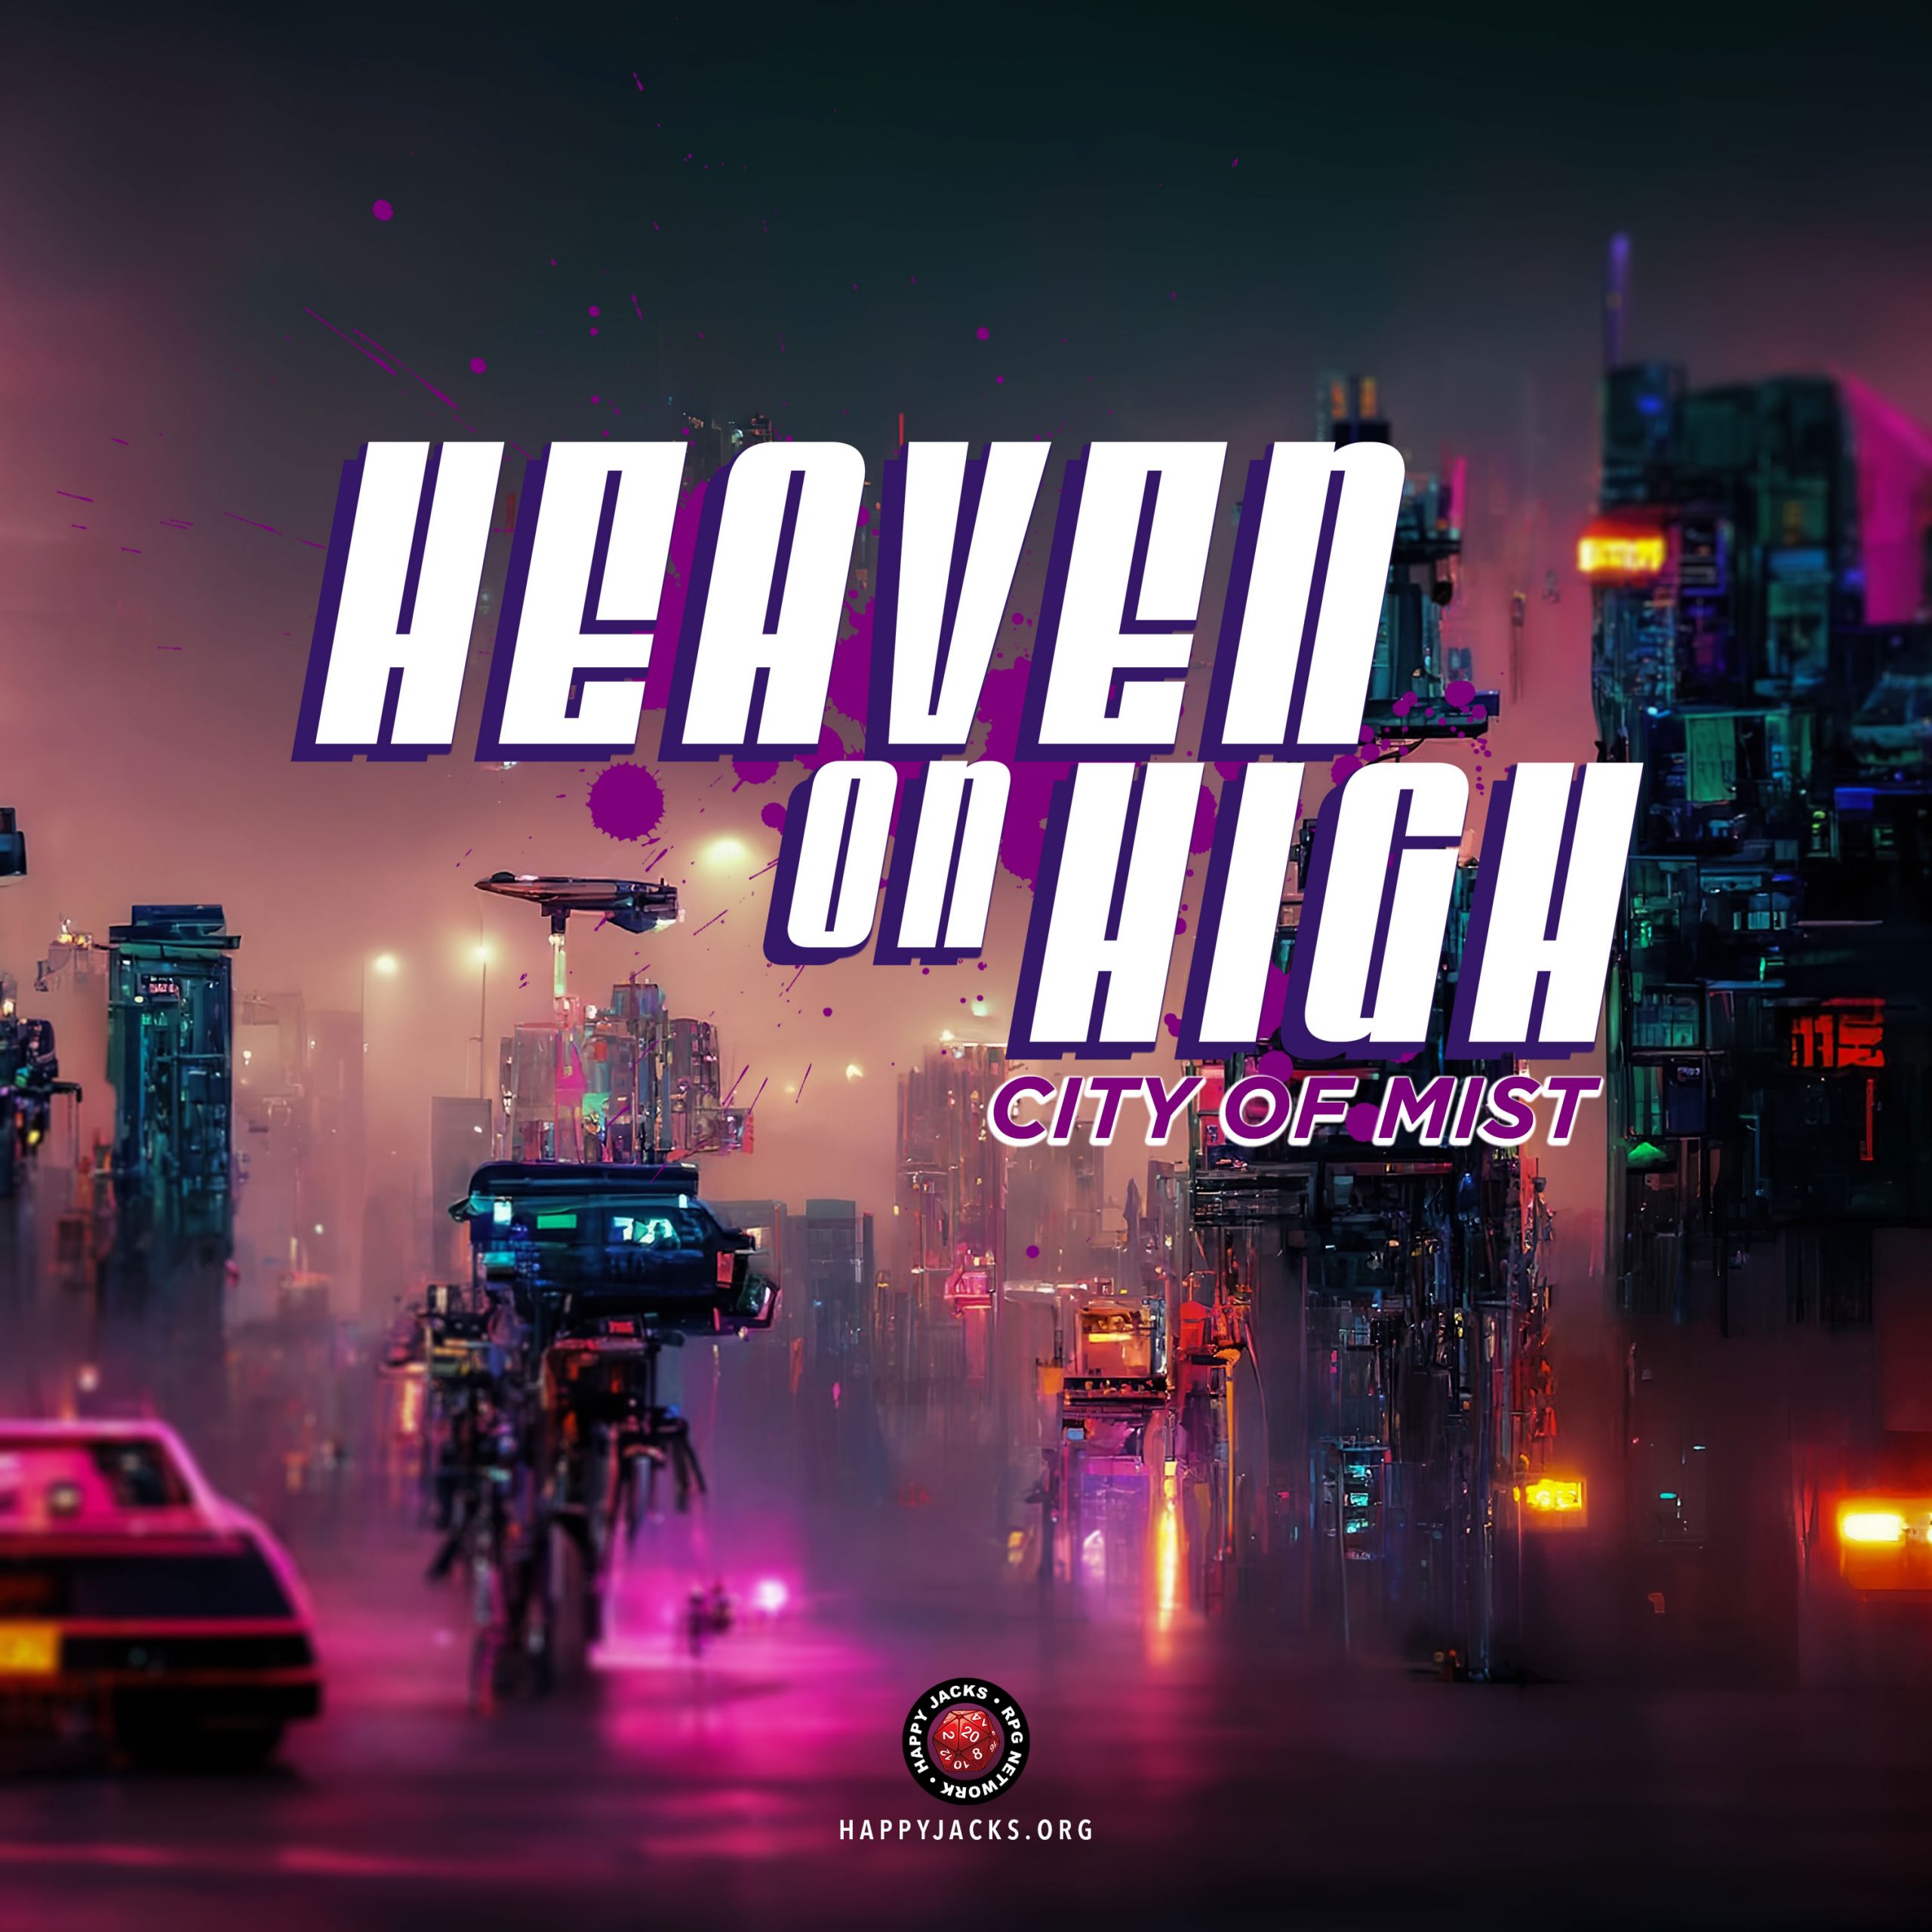 HEAVEN02 In Living Color Part 2 | Heaven on High | City of Mist